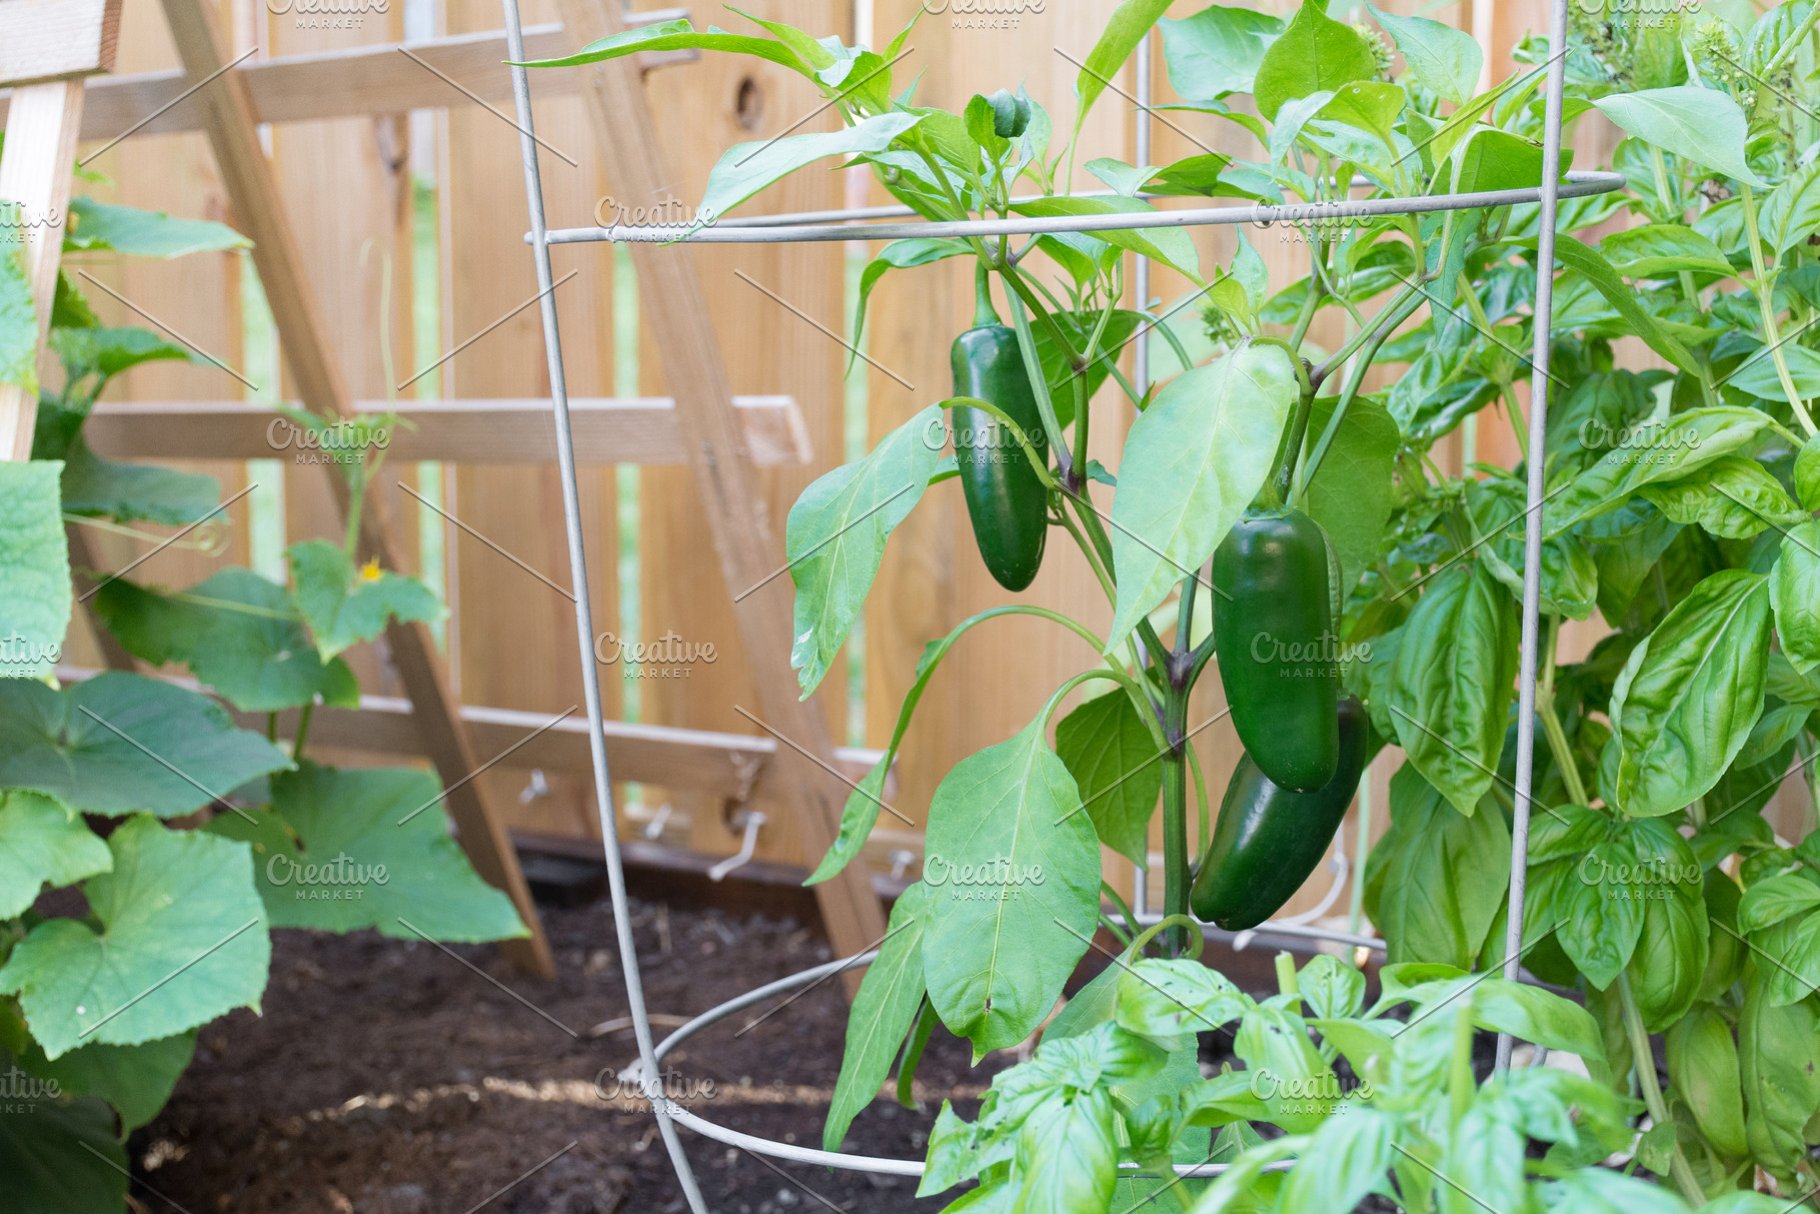 How To Grow Jalapenos & Preserve Your Harvest